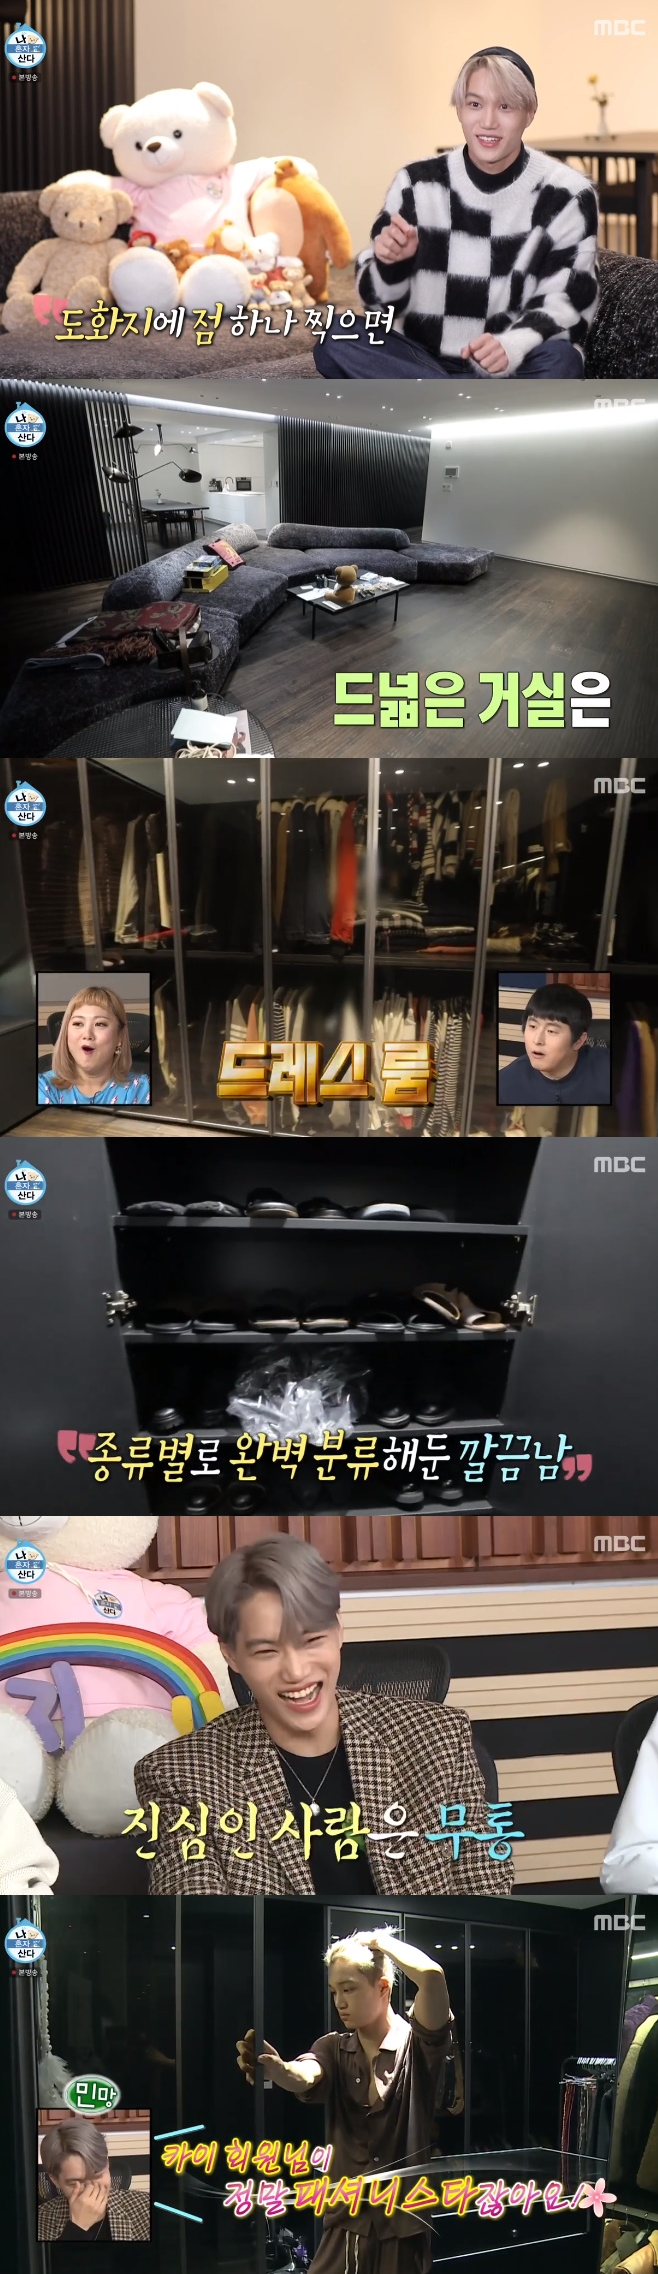 In I Live Alone, EXO Kai has released all of his clean interiors, from his clean and honest daily life with his two nephews.MBC entertainment program I Live Alone broadcasted on the night of the 20th introduced the daily life of group EXO member Kai.On this day, Kai told her about her habits of managing clothes, from home interiors full of specialties.Kai said: The whole house was Interiors with a feeling that it was a fuse paper, adding a point or two to it.For example, the living room has a sofa, and the kitchen has a table and lighting. The unseen one was one of the special things. Kai said, The door was as untidy as the wall.So, like a secret space, all spaces are connected. He introduced the door painted in the same color as the wall.Kai then unveiled a two-room dress room, which she said: I really like clothes, I keep collecting without throwing them away; the big dress room keeps outerwear, tops and accessories.In the small dressing room, I keep my pants and my bag. There are two dress rooms. I have my pajamas in my room. I love clothes so much, I mean them and I love them, said Kai, because I have a habit of not taking tags because Ive been out of tags since I was 20.When you were a child, you actually care about each of these clothes.I thought I could sell it when I could not afford it because I had clothes that cost, and I always wanted to wear clothes like new clothes.Were taking the inconvenience, he said.After that, Kai set himself up and questioned him to the park.Im actually busy, so I dont have many days to wear clothes to buy, so I have to wear them even if its not a big deal, Kai explained to MCs who asked, Did you go to the park dressed like that?Kai, who had finished the walk, also demonstrated his cooking skills hidden for his nephews who would find him.He finished the steak by shouting the barbarian and soon made soy sauce egg rice to supplement carbohydrates.Shortly after, Kais two nephews arrived at his home, where Kai said: The first sisters son and daughter, the first seven and the second five.All my family members live a block away. I like to take care of my child, and I decided to take care of it for about two hours today.Kai then went on Hide and Seek after finishing a warlike meal with her two children, among whom Kai said: I like Hide and Seek.I like them, and I feel comfortable. If you hide really well, you can rest for a long time. Thats why you remodeled the house. But, contrary to Kais expectations, Kai was found on the phone by her nephew, and then she hid herself in the dress room.Kai was embarrassed by the sofa, and he played the movie to buy time until his sister came, or showed off his dancing skills, but his nephew said, Its not cool.